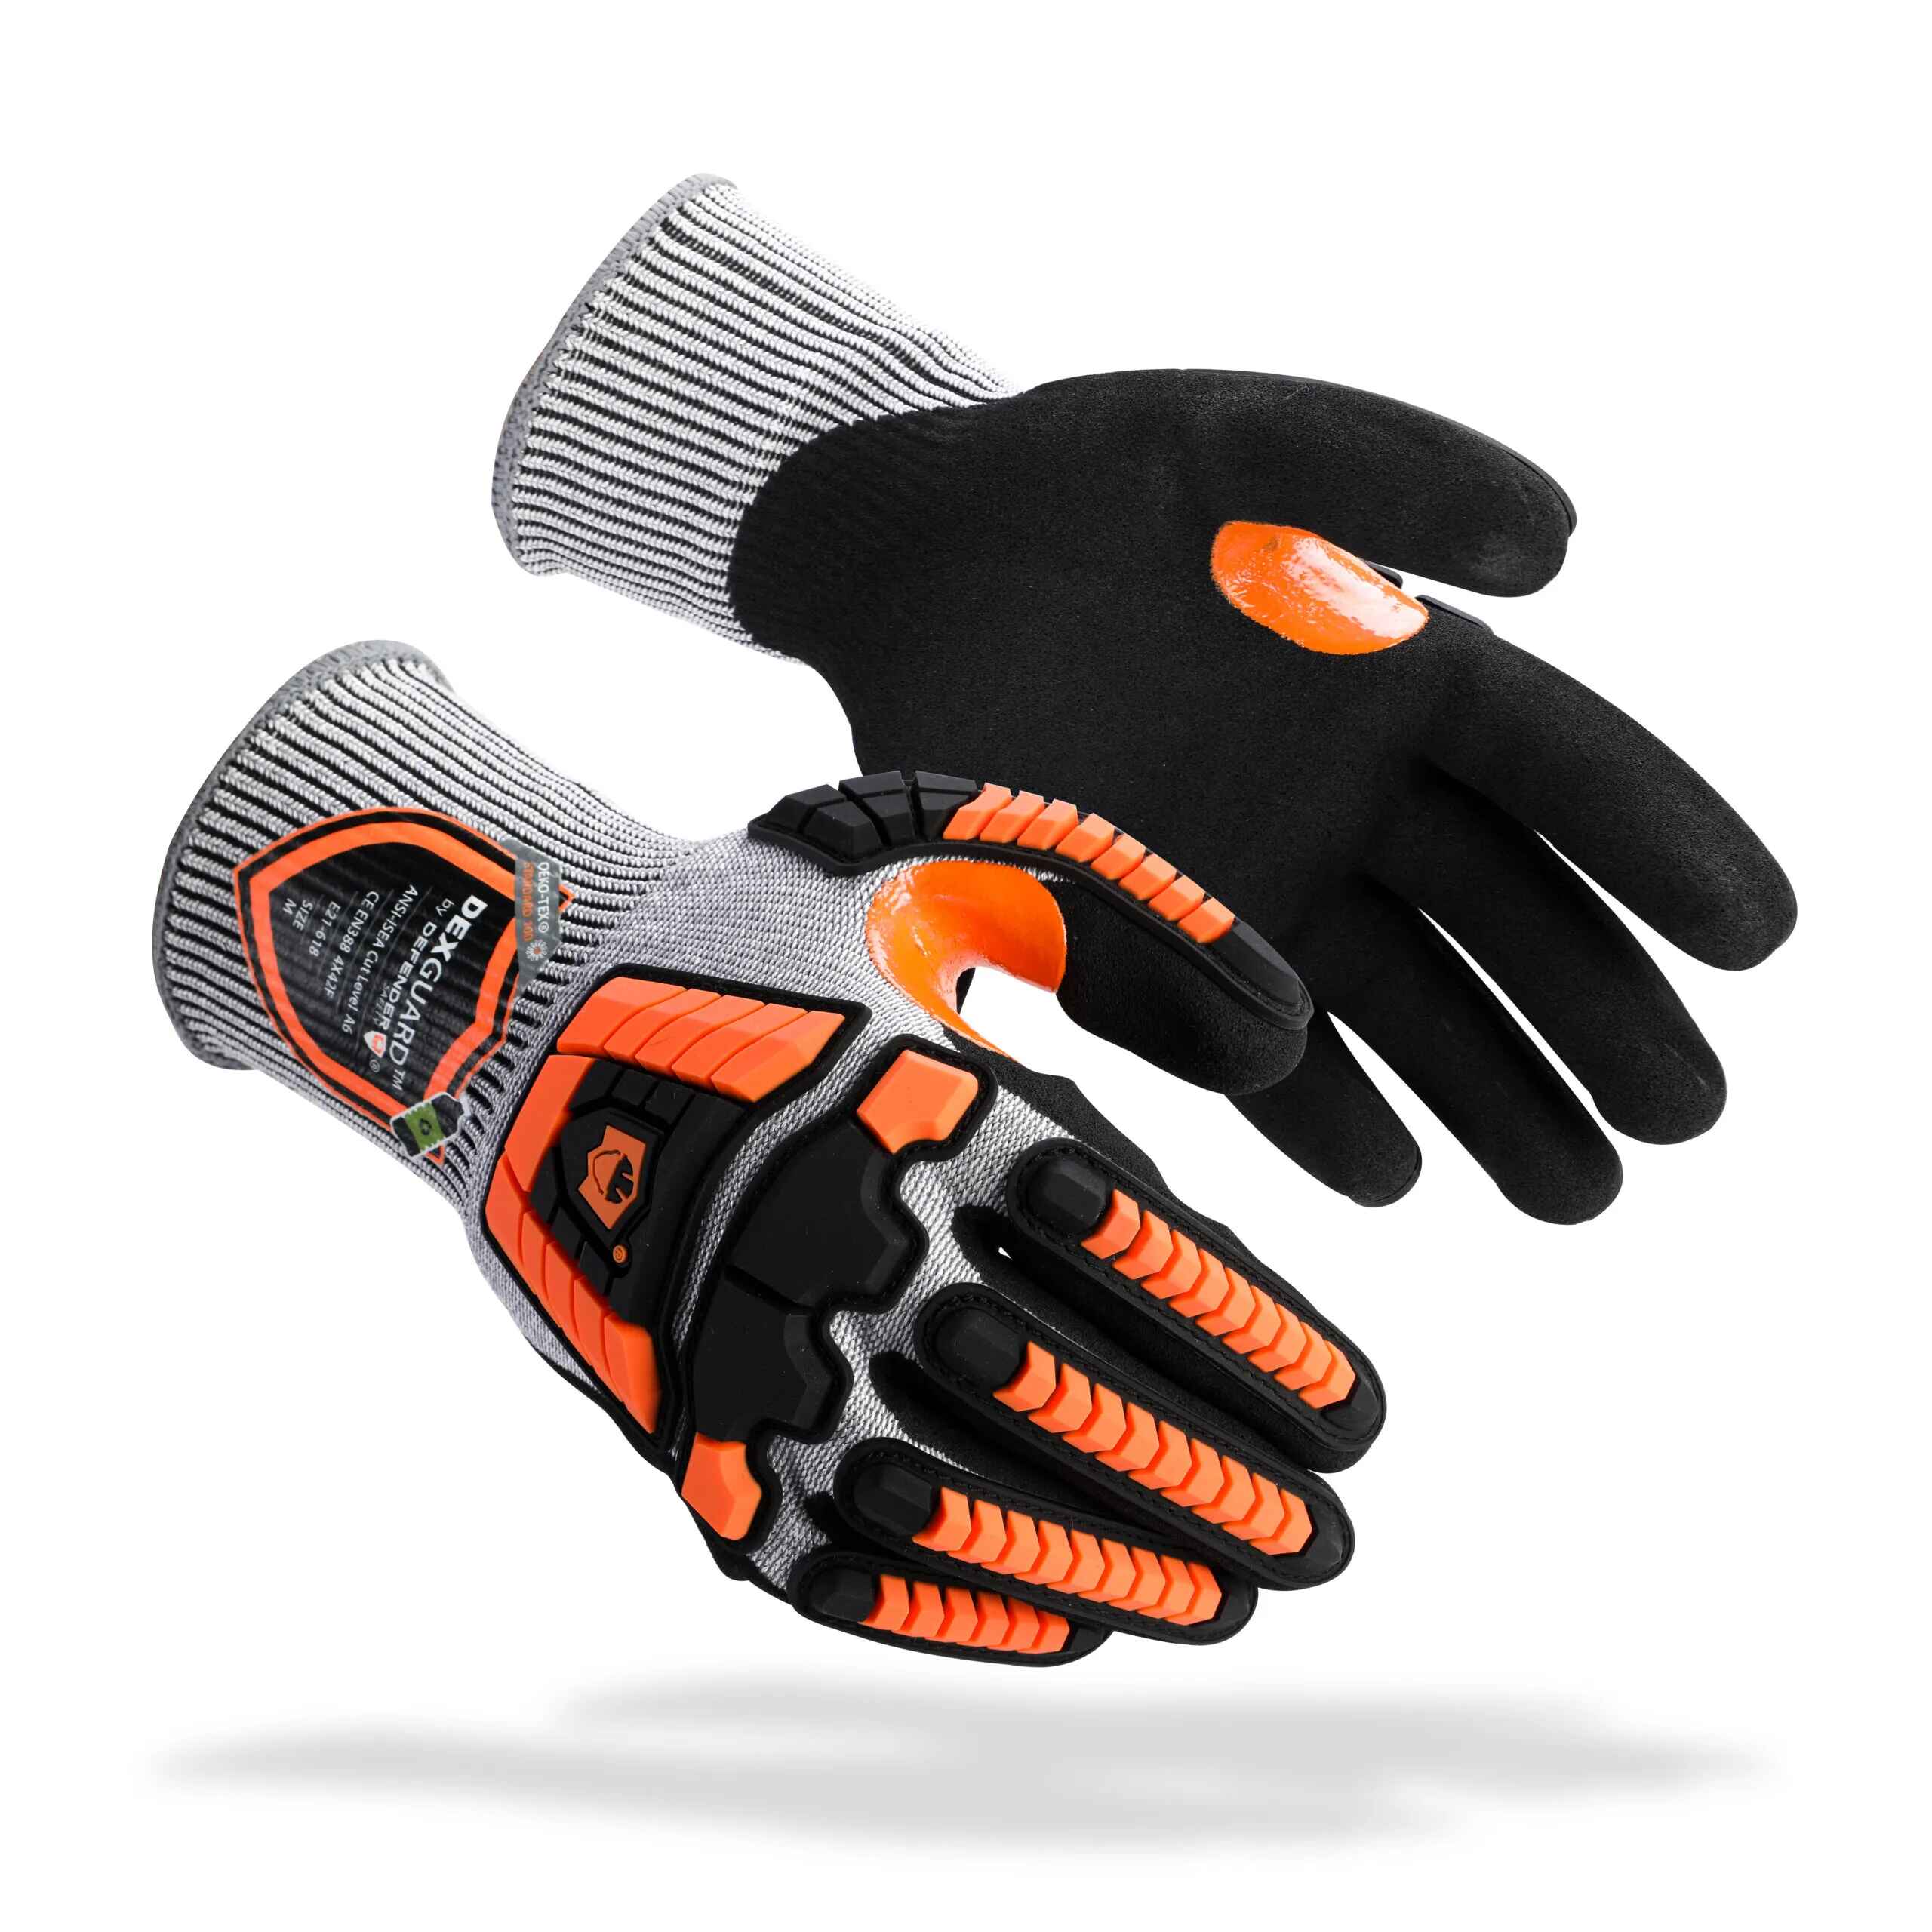 DEXGUARD™ A6 Cut Gloves, Back of the Hand Impact Resistant, Level 4 Abrasion Resistant, Textured Nitrile Coating. - Defender Safety